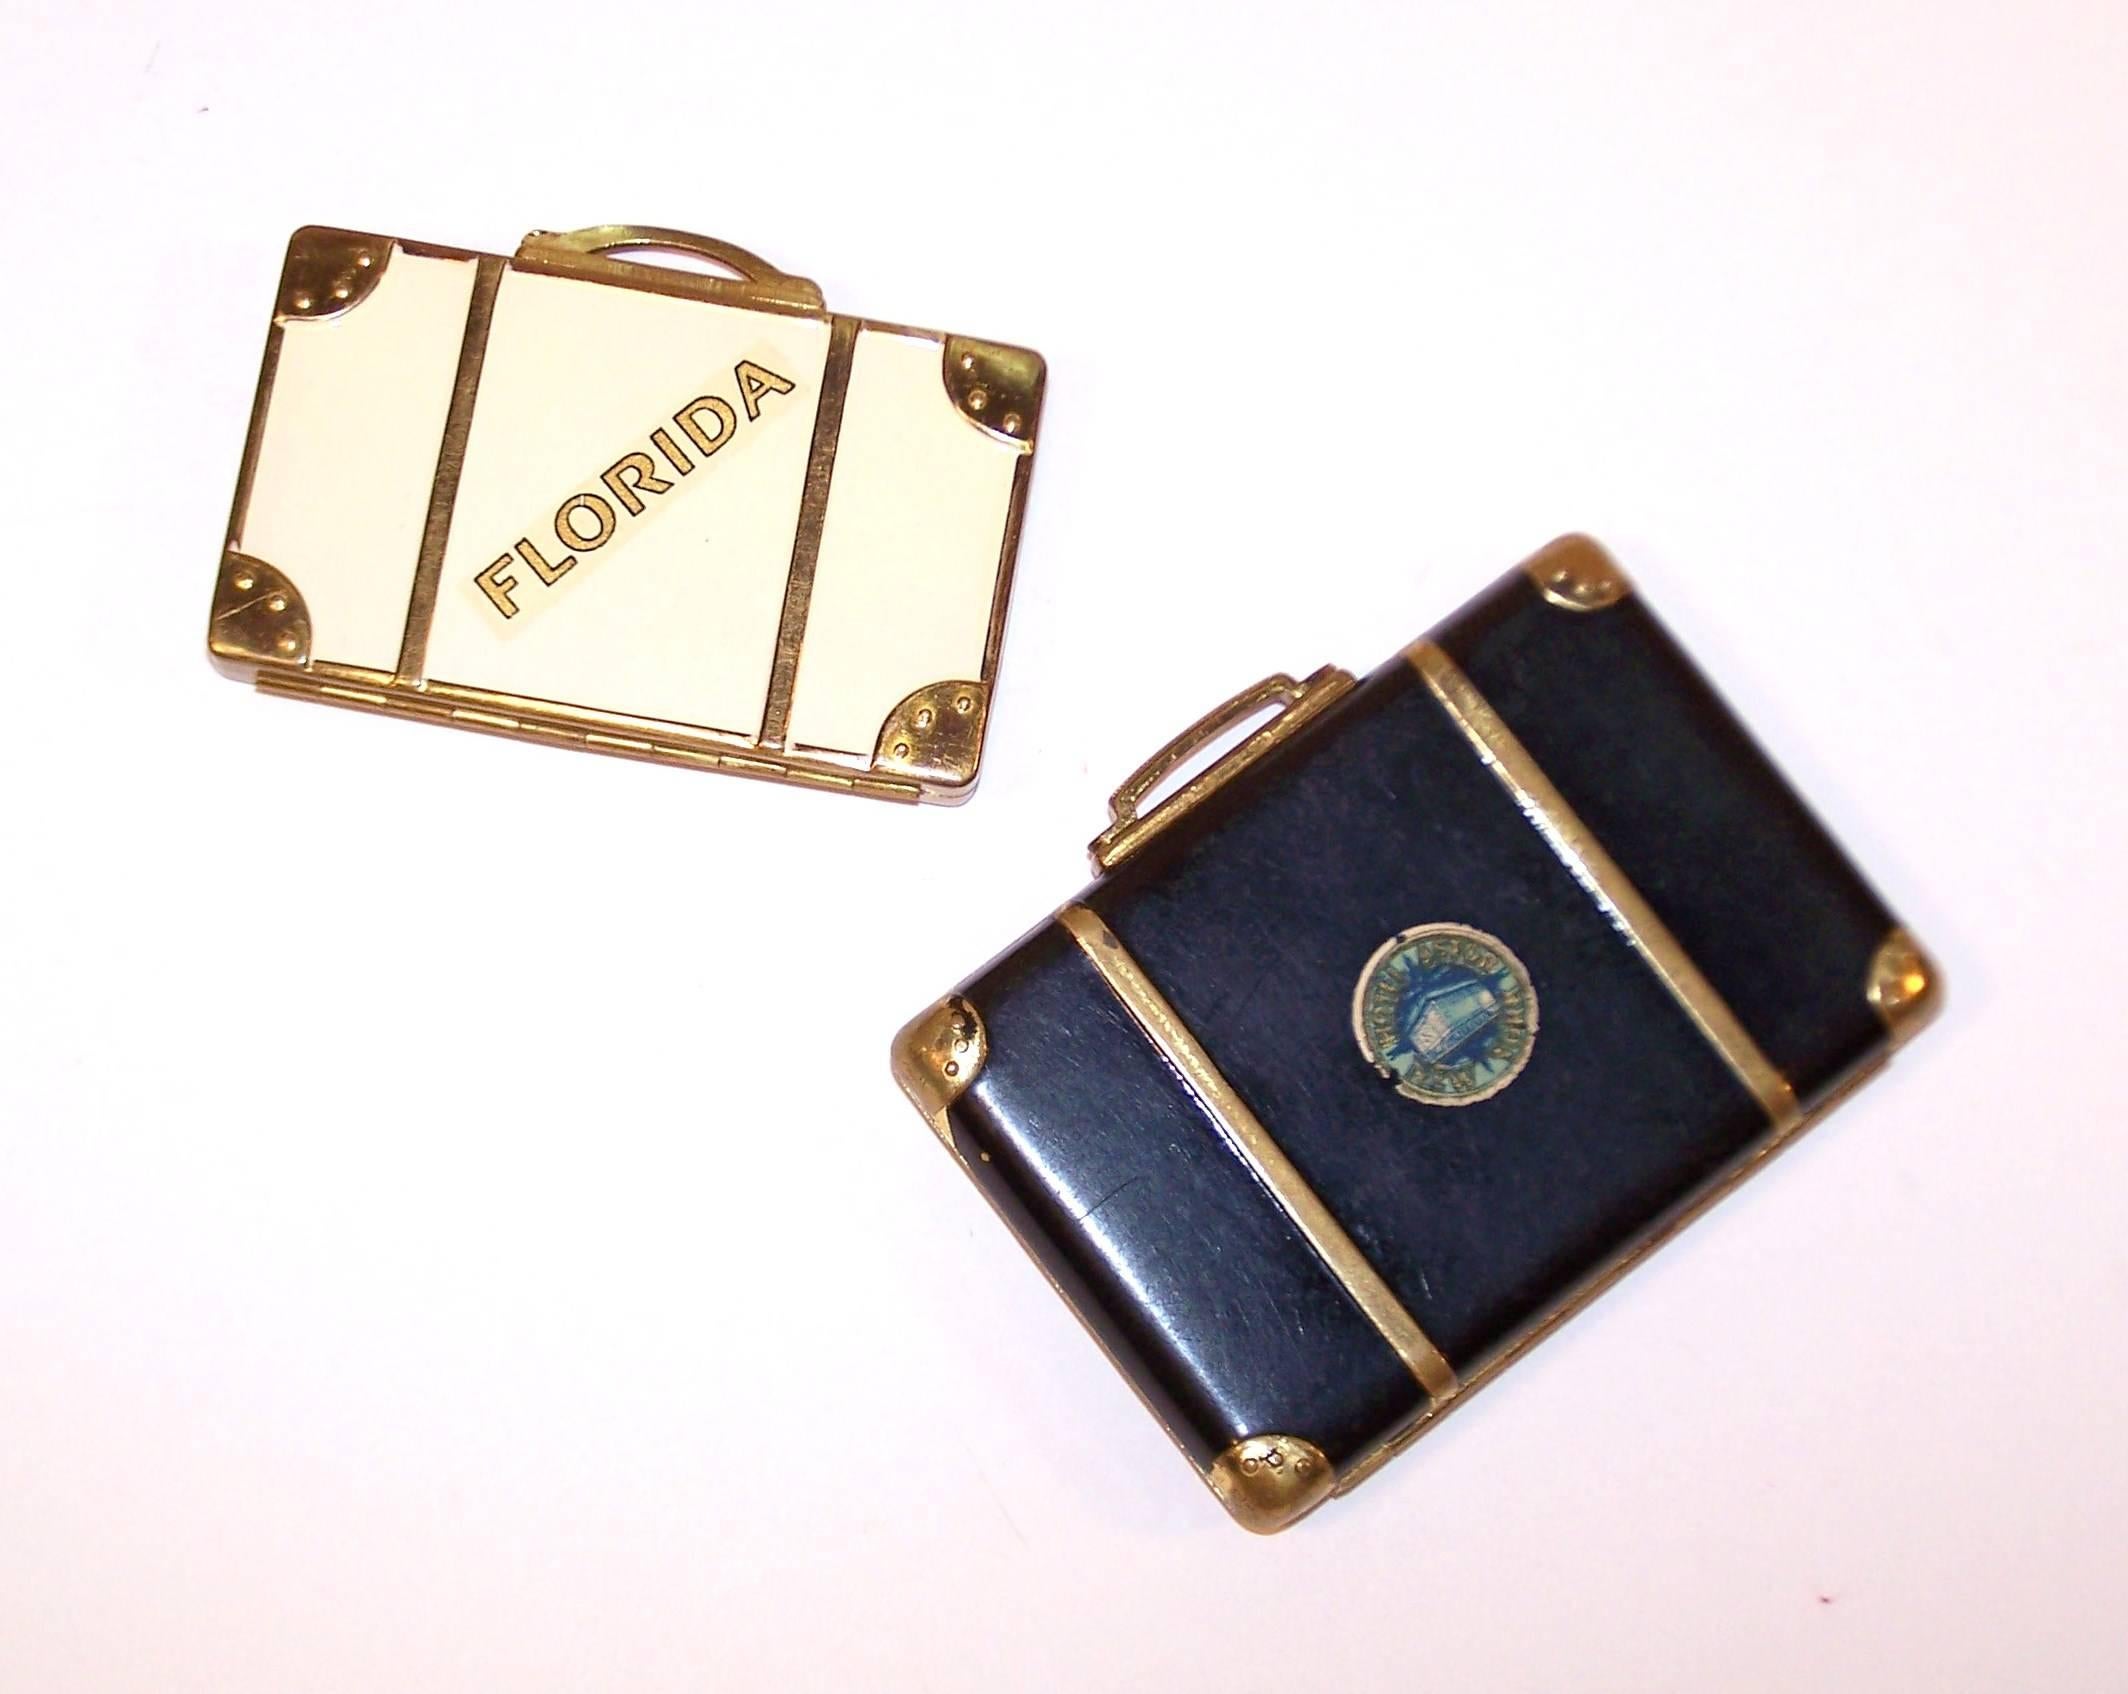 Supersized is fun but miniatures rule!  These adorable 1940's powder compacts are designed to resemble well traveled suitcases complete with trompe l'oeil buckled straps, rivets and destination badges.  The handle depresses to reveal a mirrored two